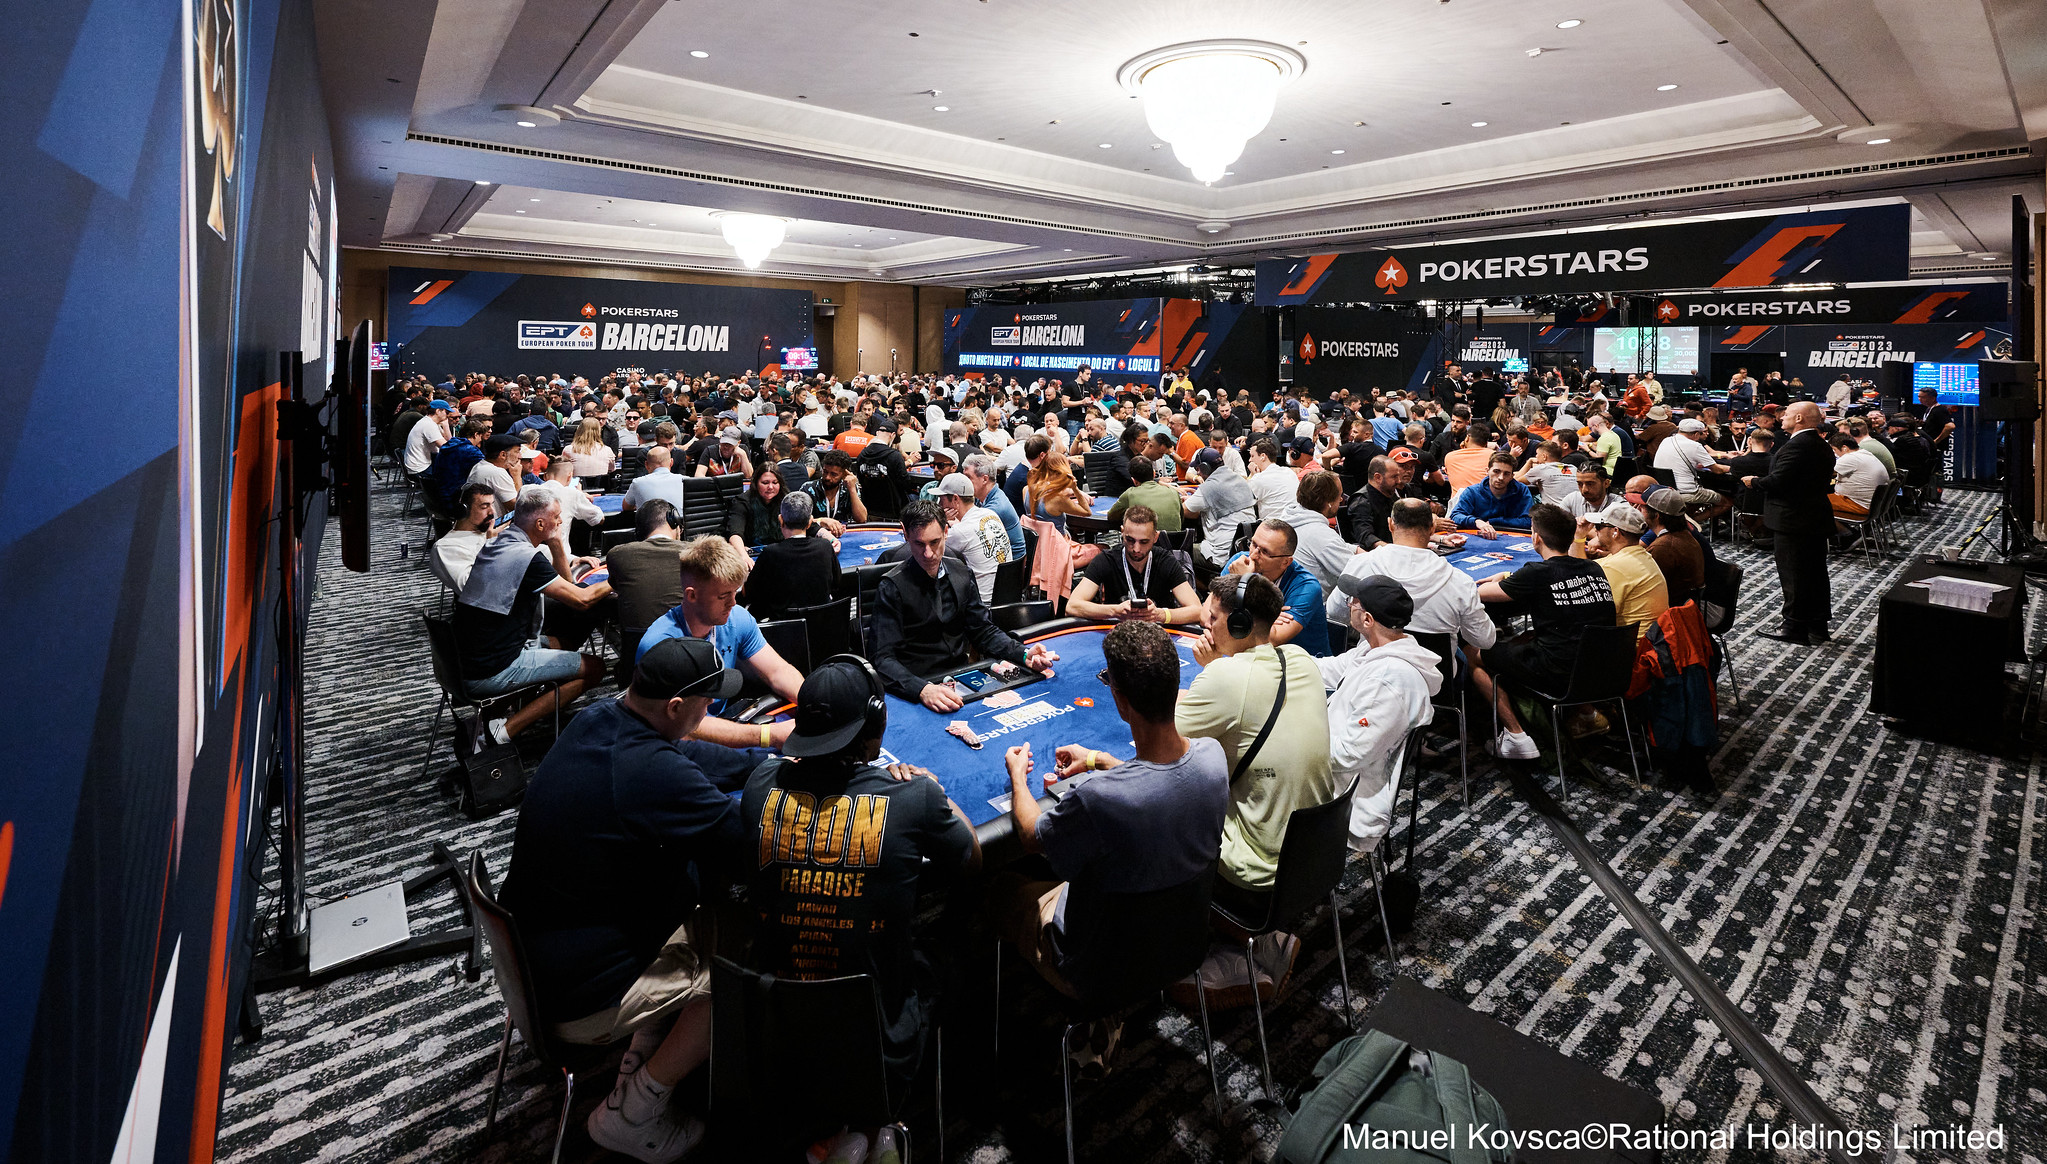 There are already 4,331 entries in the ESPT Main Event, will we see the record fall?